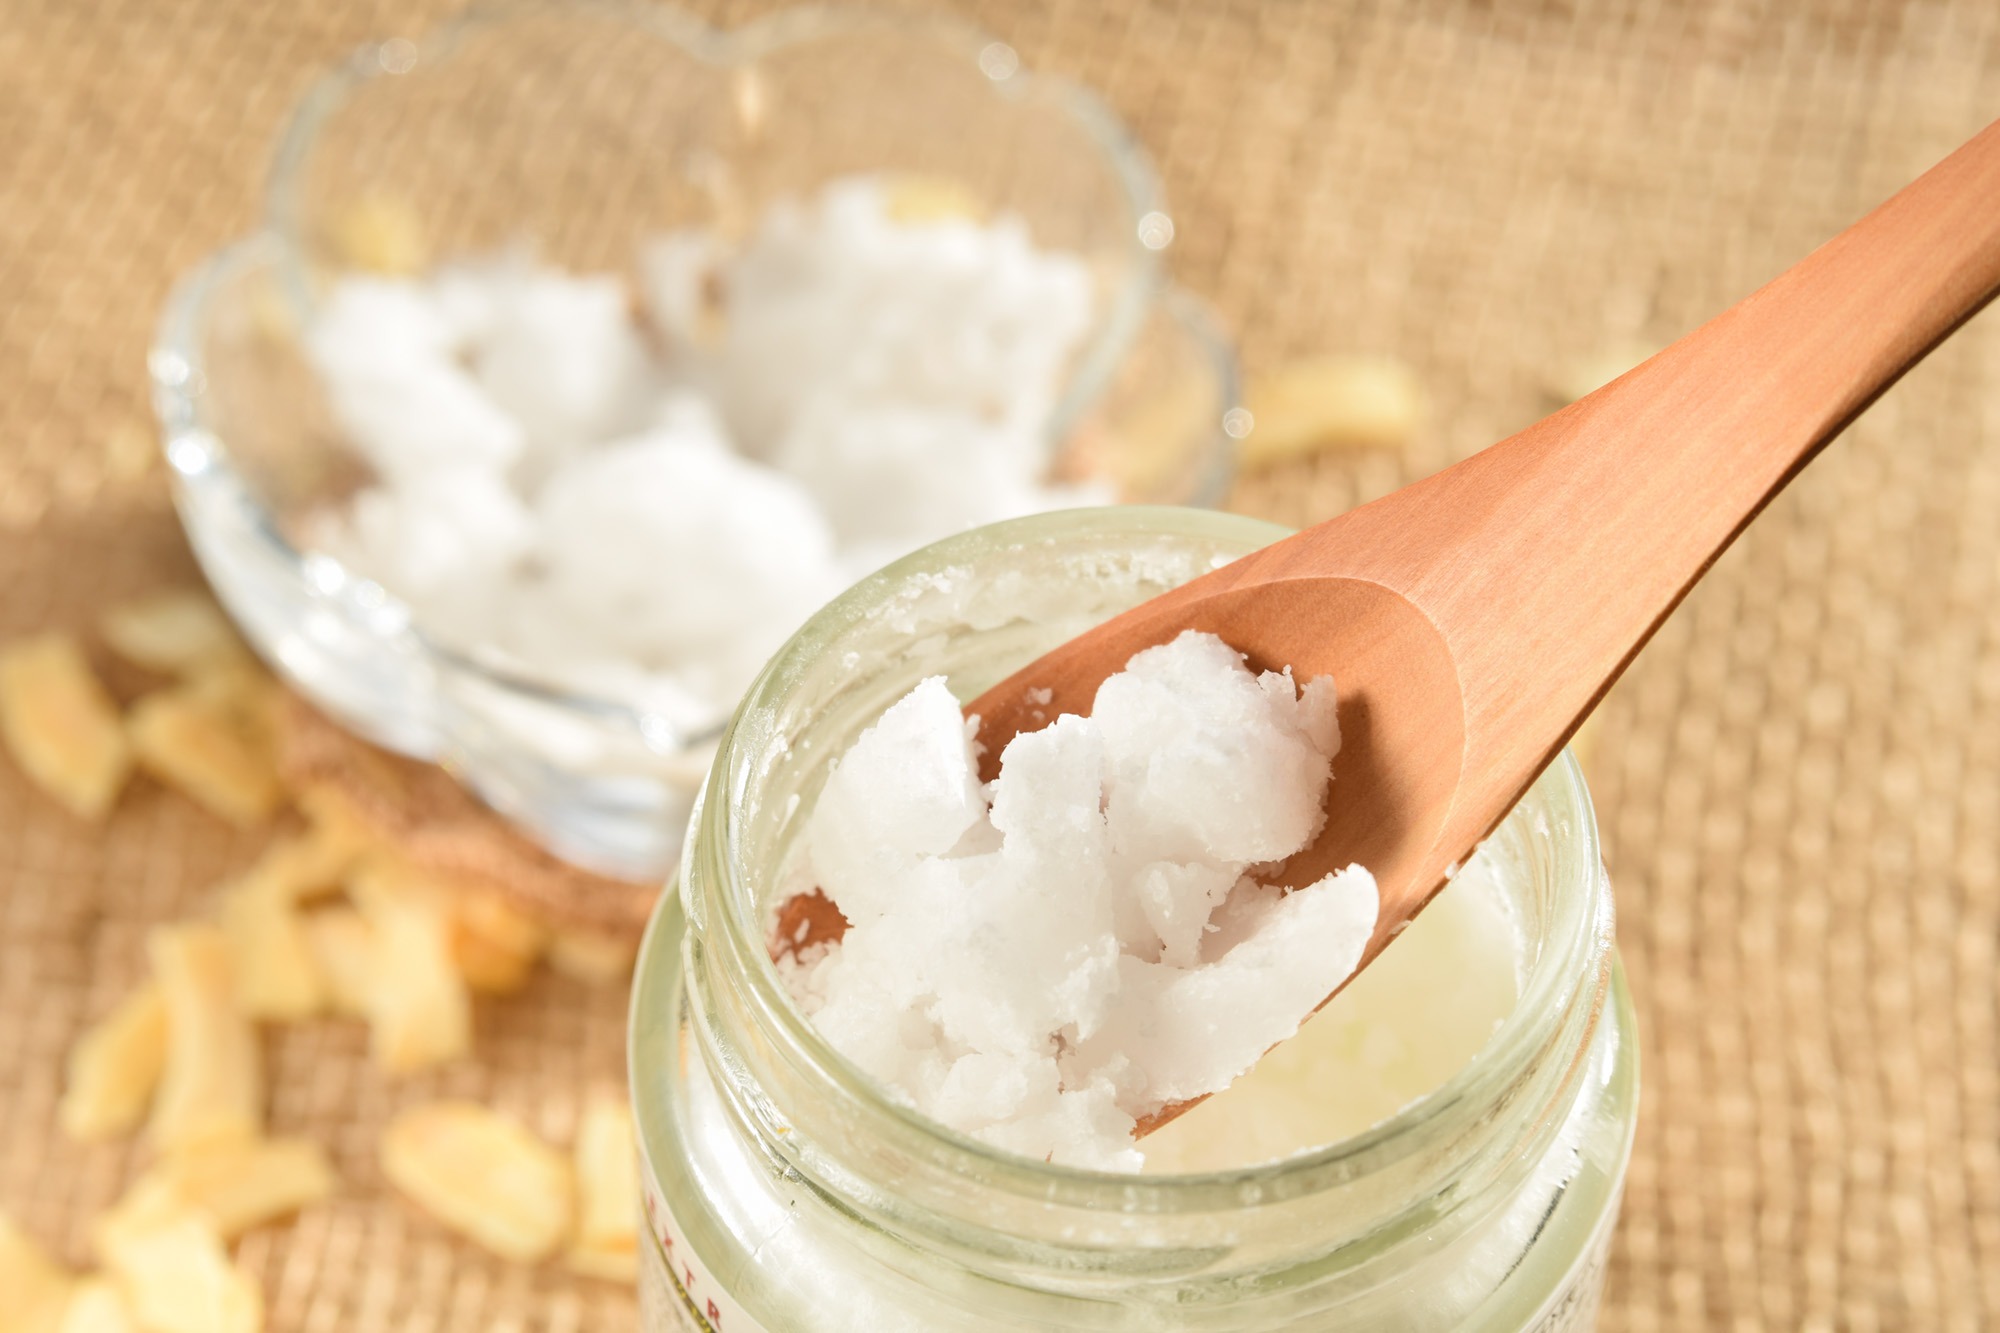 coconut oil with spoon